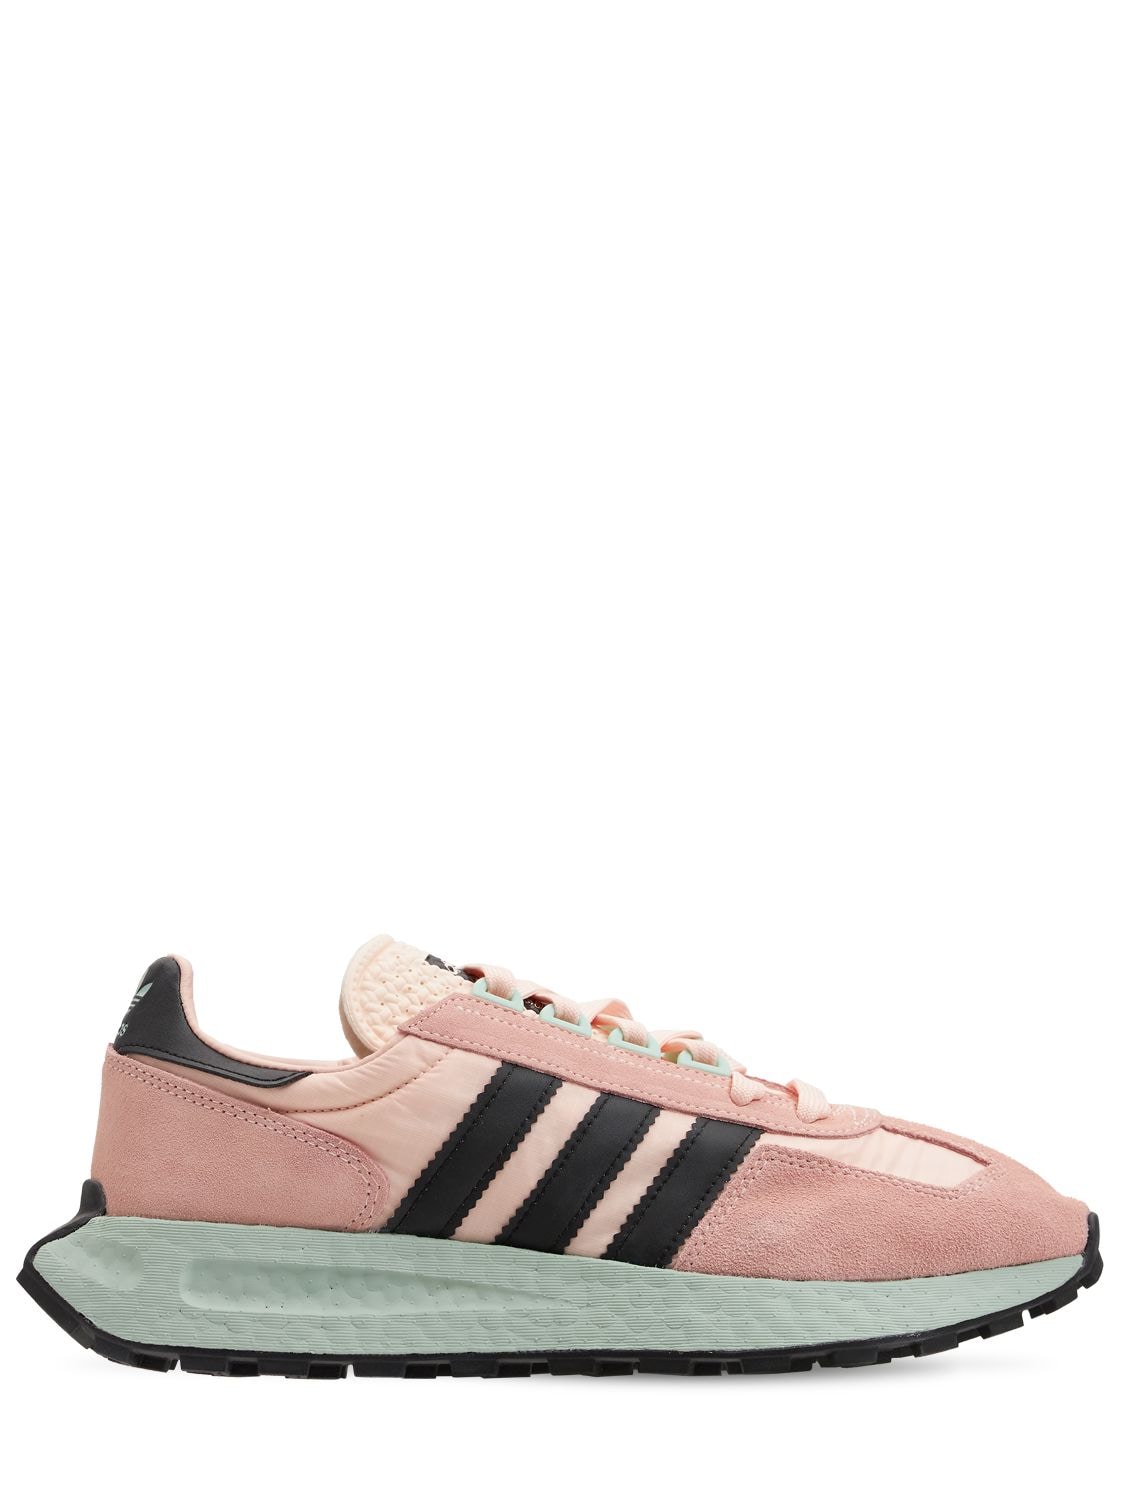 Adidas Originals Retropy E5 Trainers In White With Lilac Details for Women